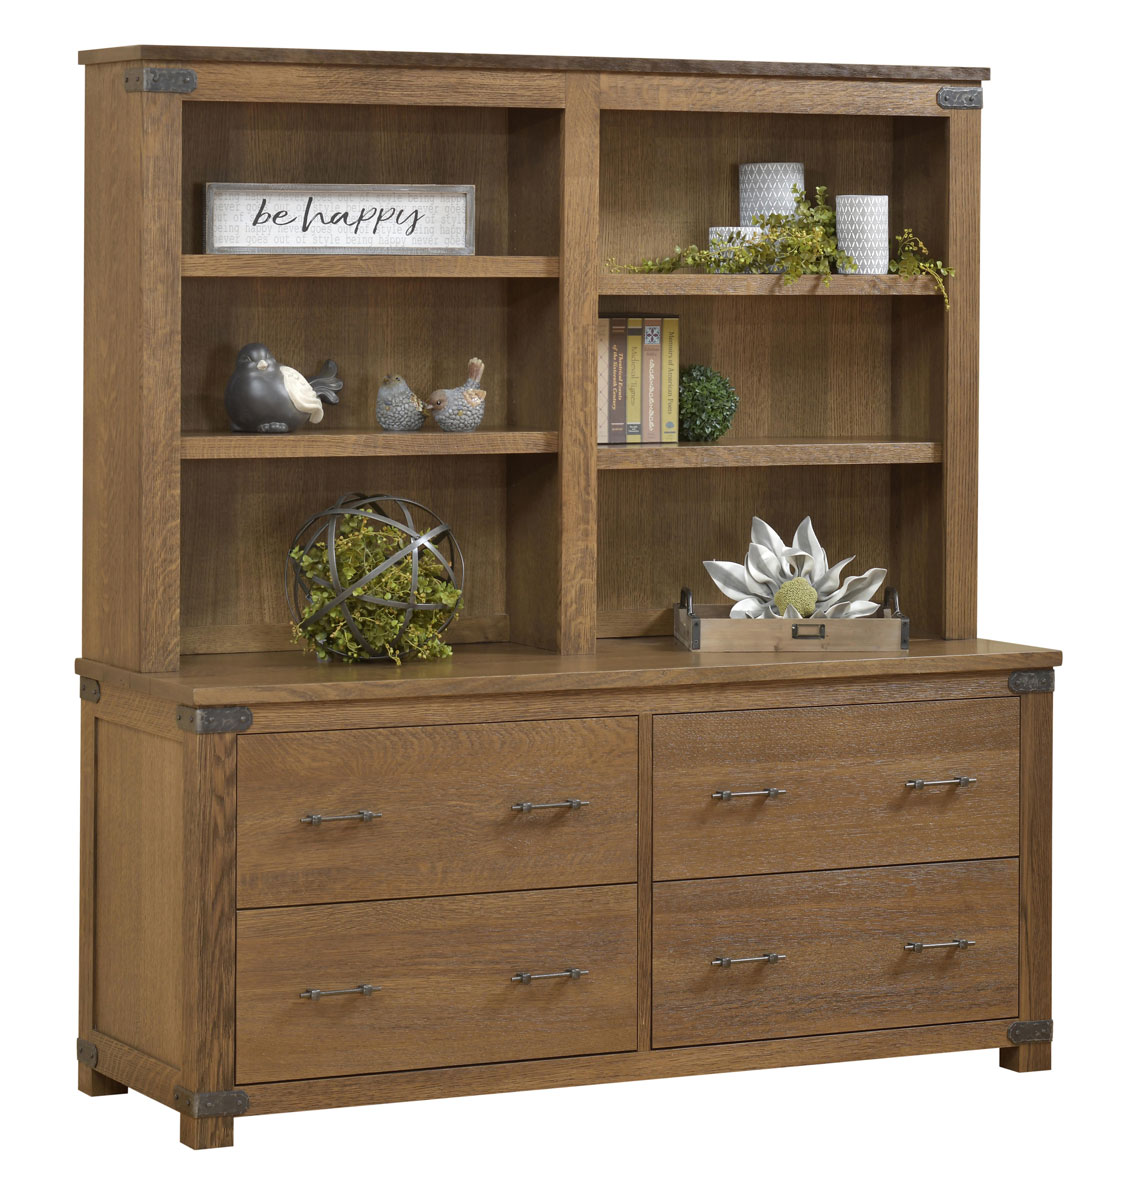 Georgetown Series Double Lateral File And Bookshelf Hutch Ohio